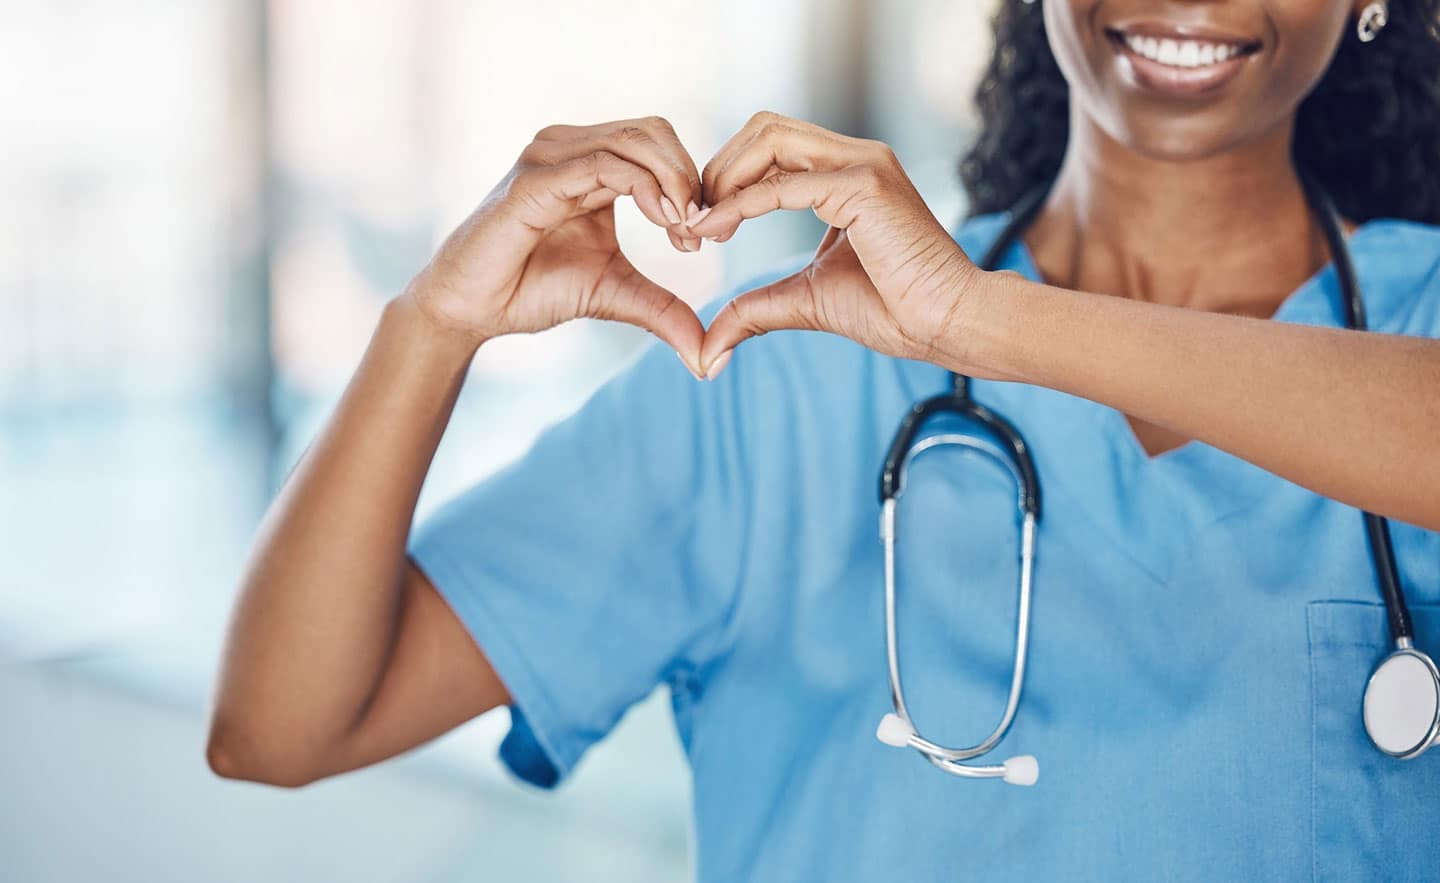 Female nurse making heart shape with her hands.